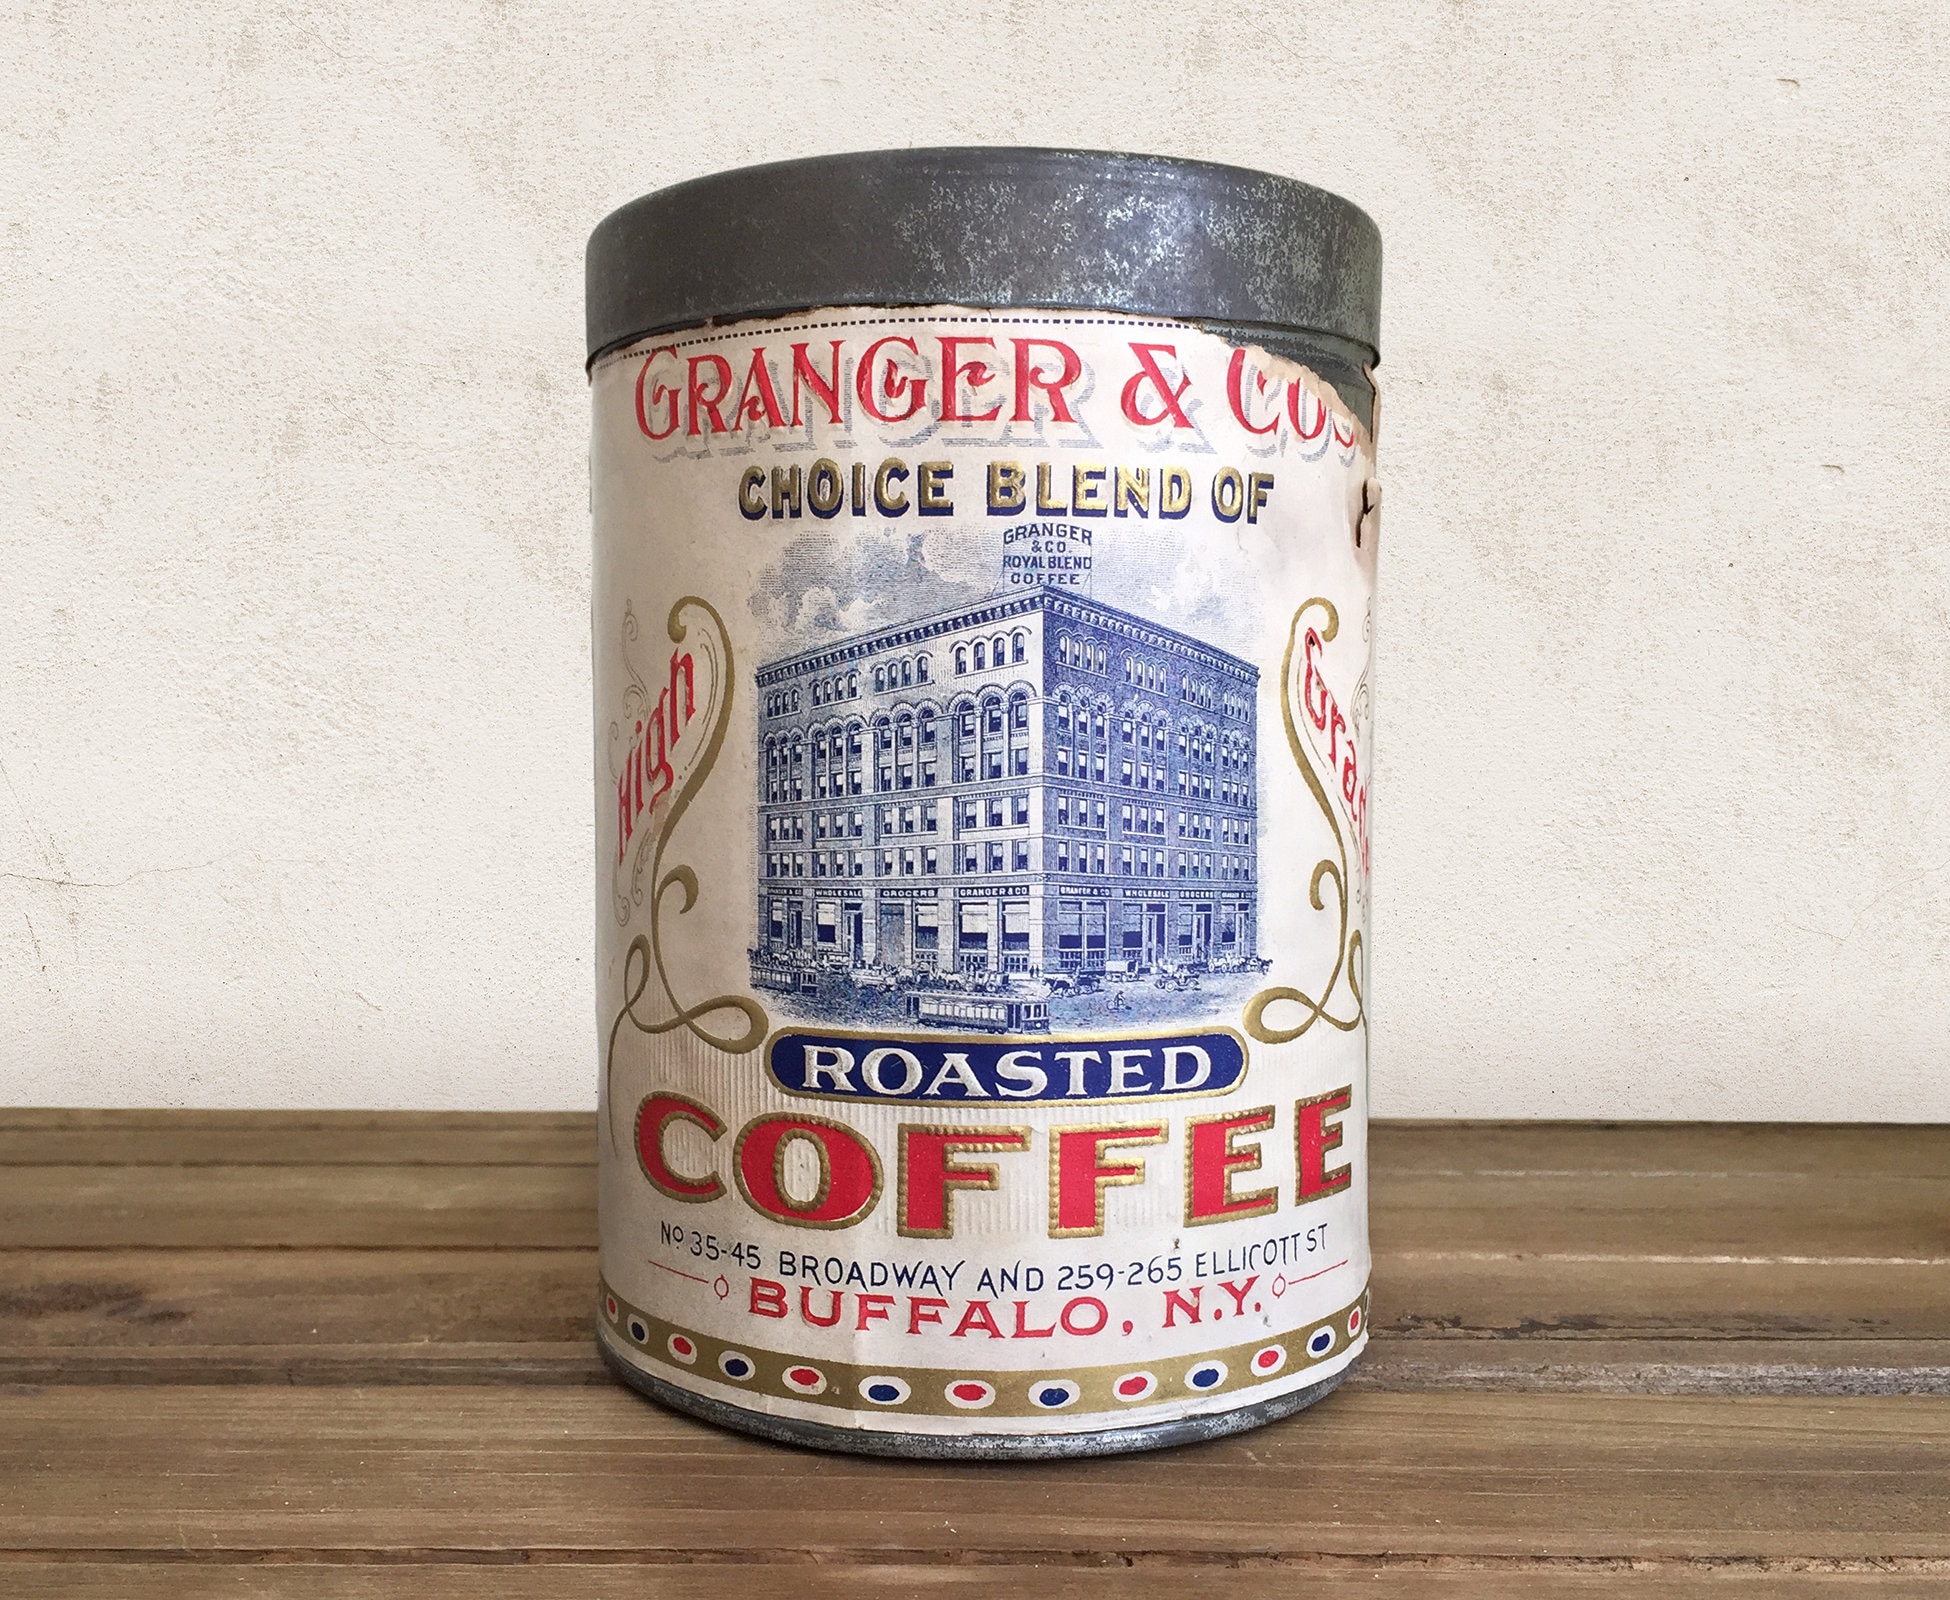 Vintage Coffee Tin, Royal Blend Granger Co, Tin With Paper Label, General Store Advertising Tins, Antique Food Can, Rustic Shelf Decor